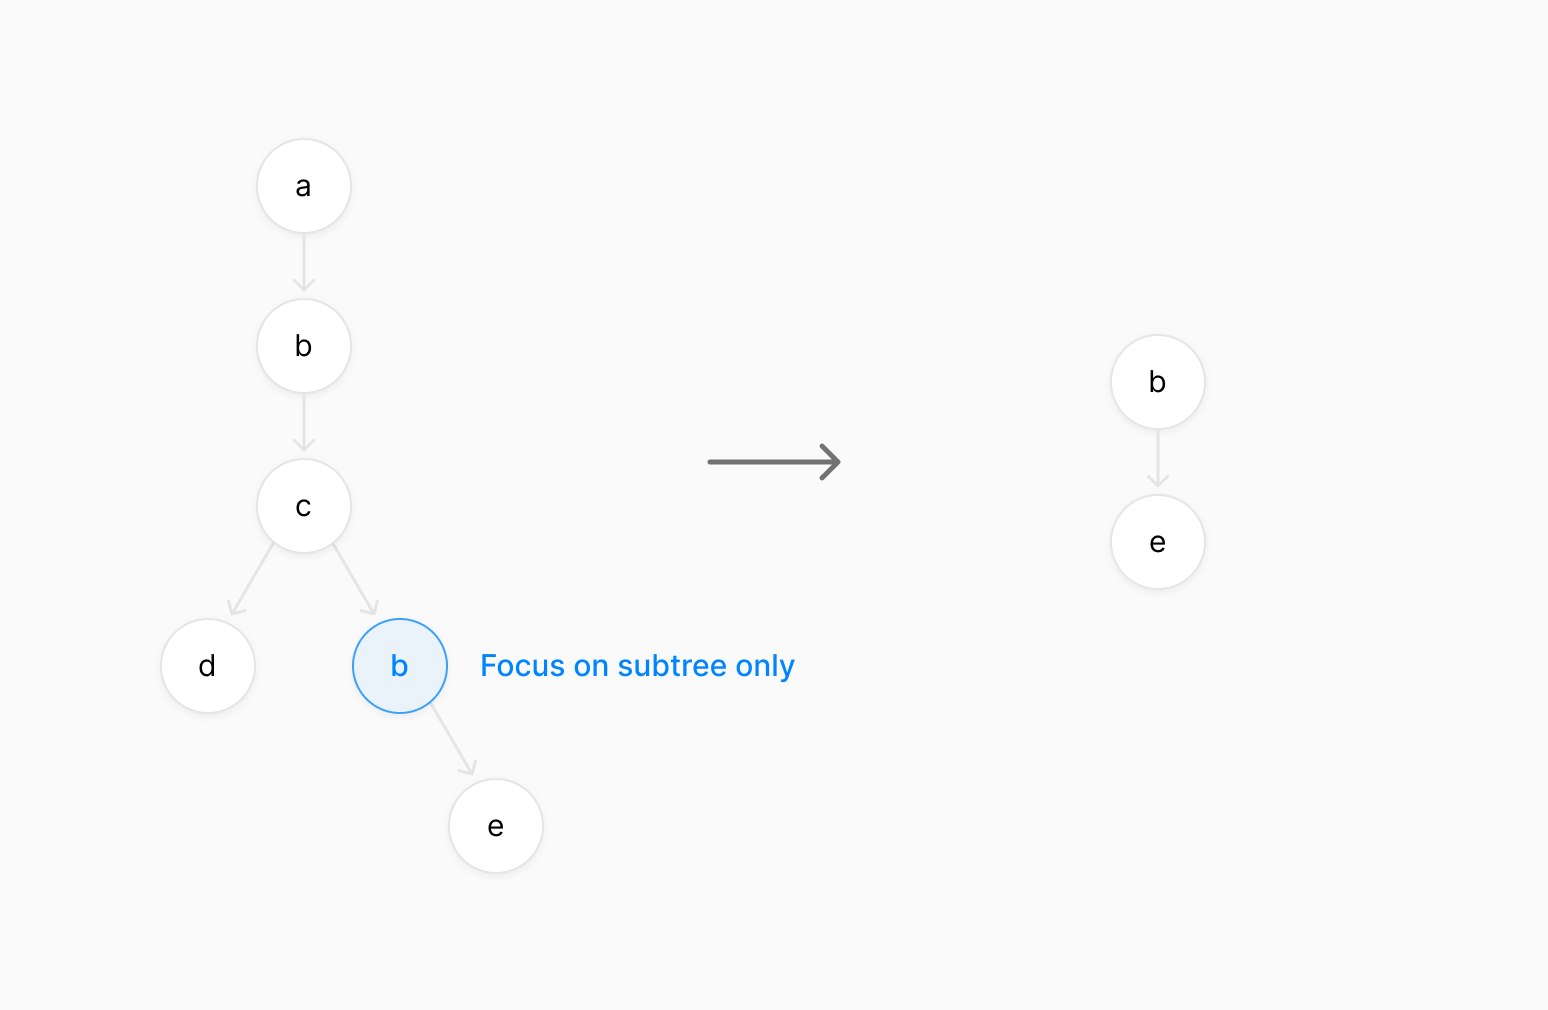 Focus on subtree only diagram